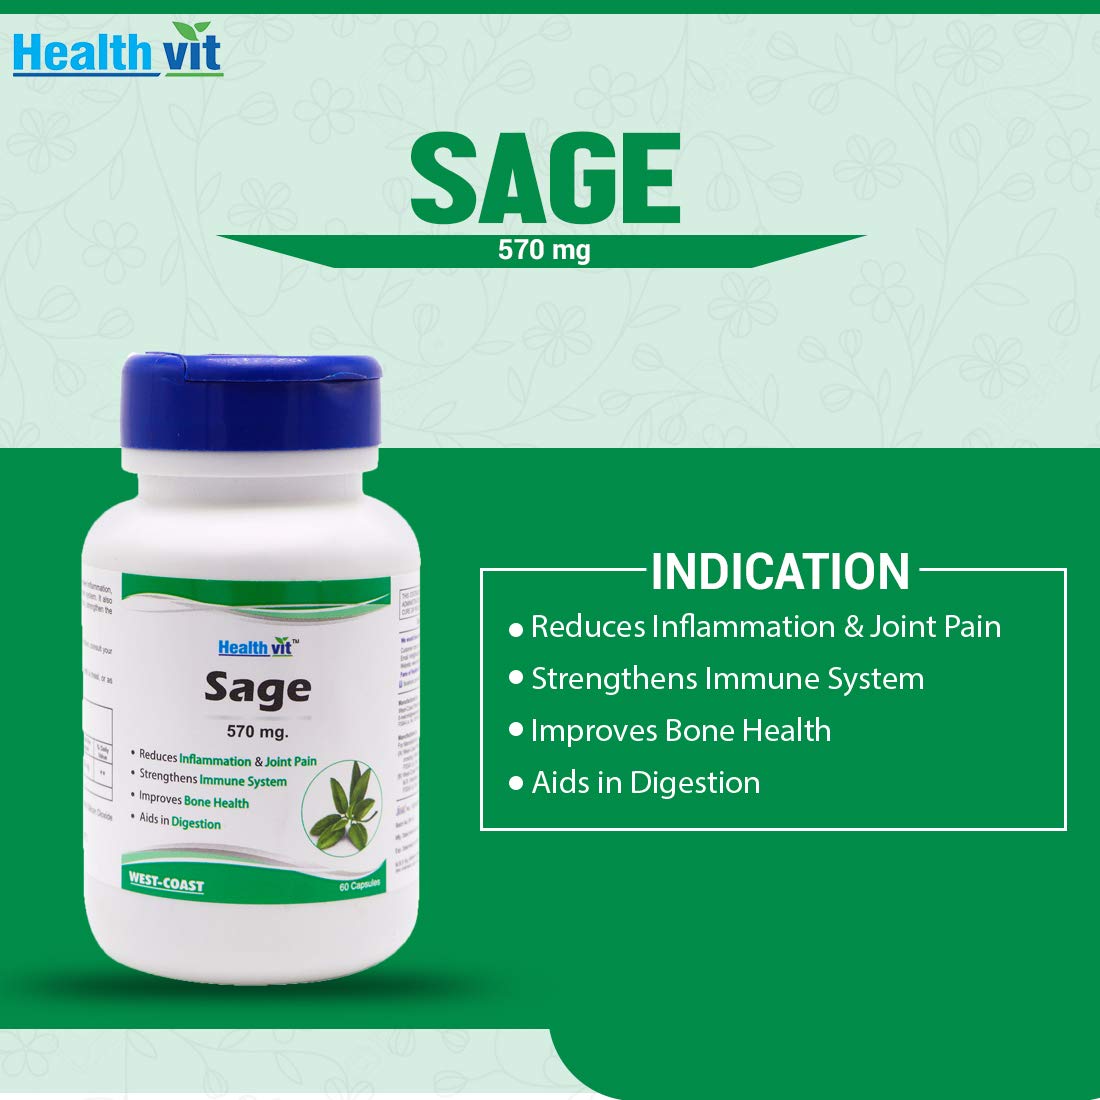 Healthvit Sage 570mg For Improves Bone Health | Reduces Inflammation And Joint Pain | Strengthens Immune System | Supports Brain And Memory Health | 100% Natural And Vegan | 60 Capsules